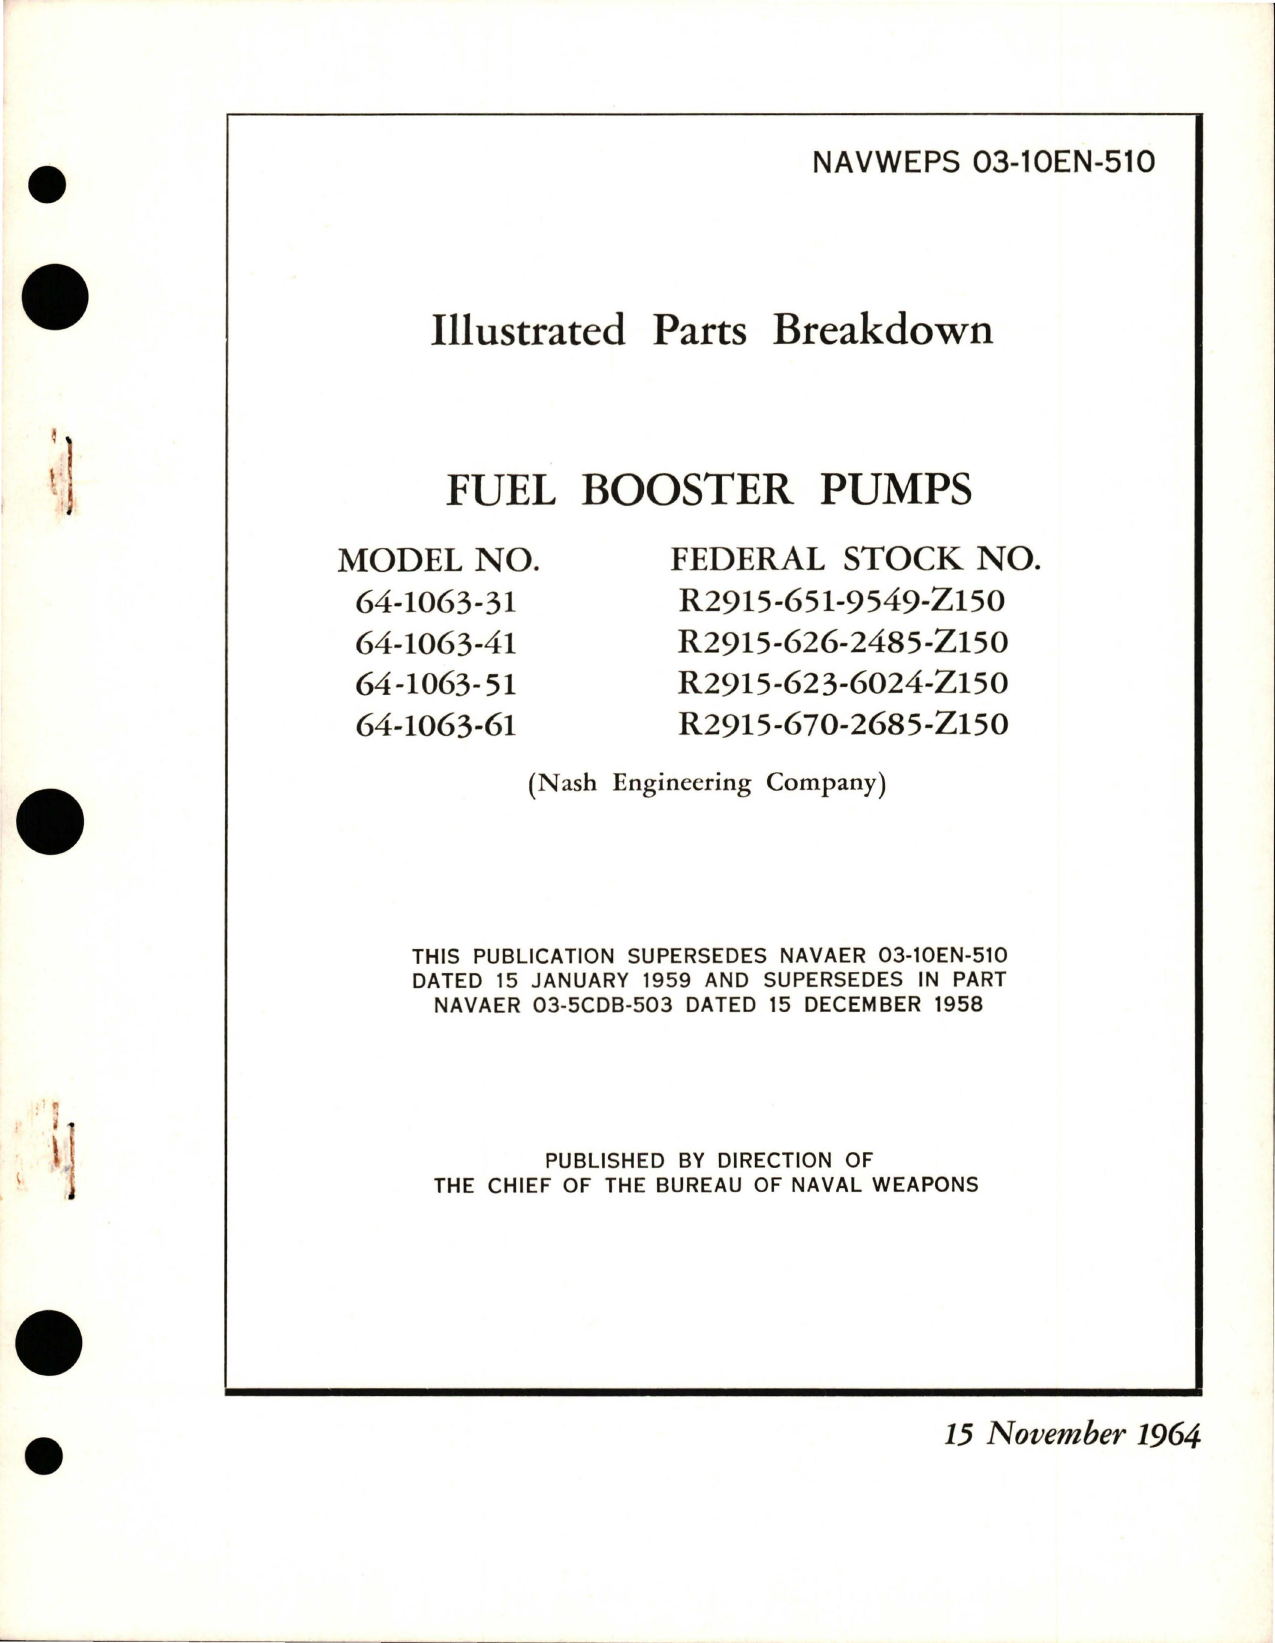 Sample page 1 from AirCorps Library document: Illustrated Parts Breakdown for Fuel Booster Pumps 